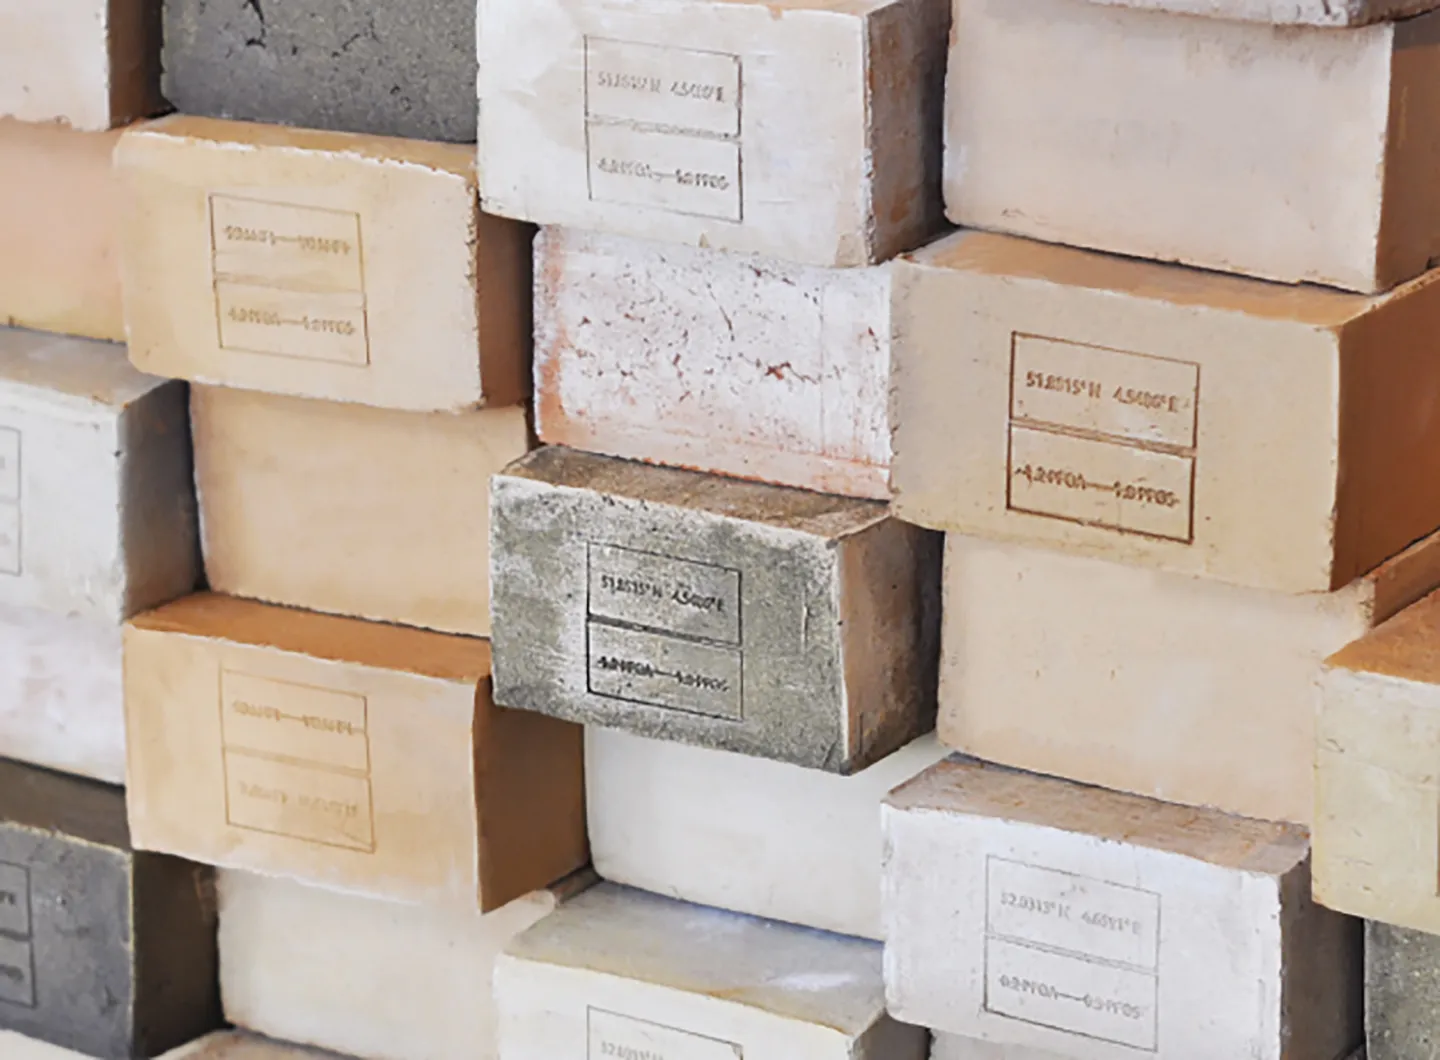 Turning polluted soil into bricks 